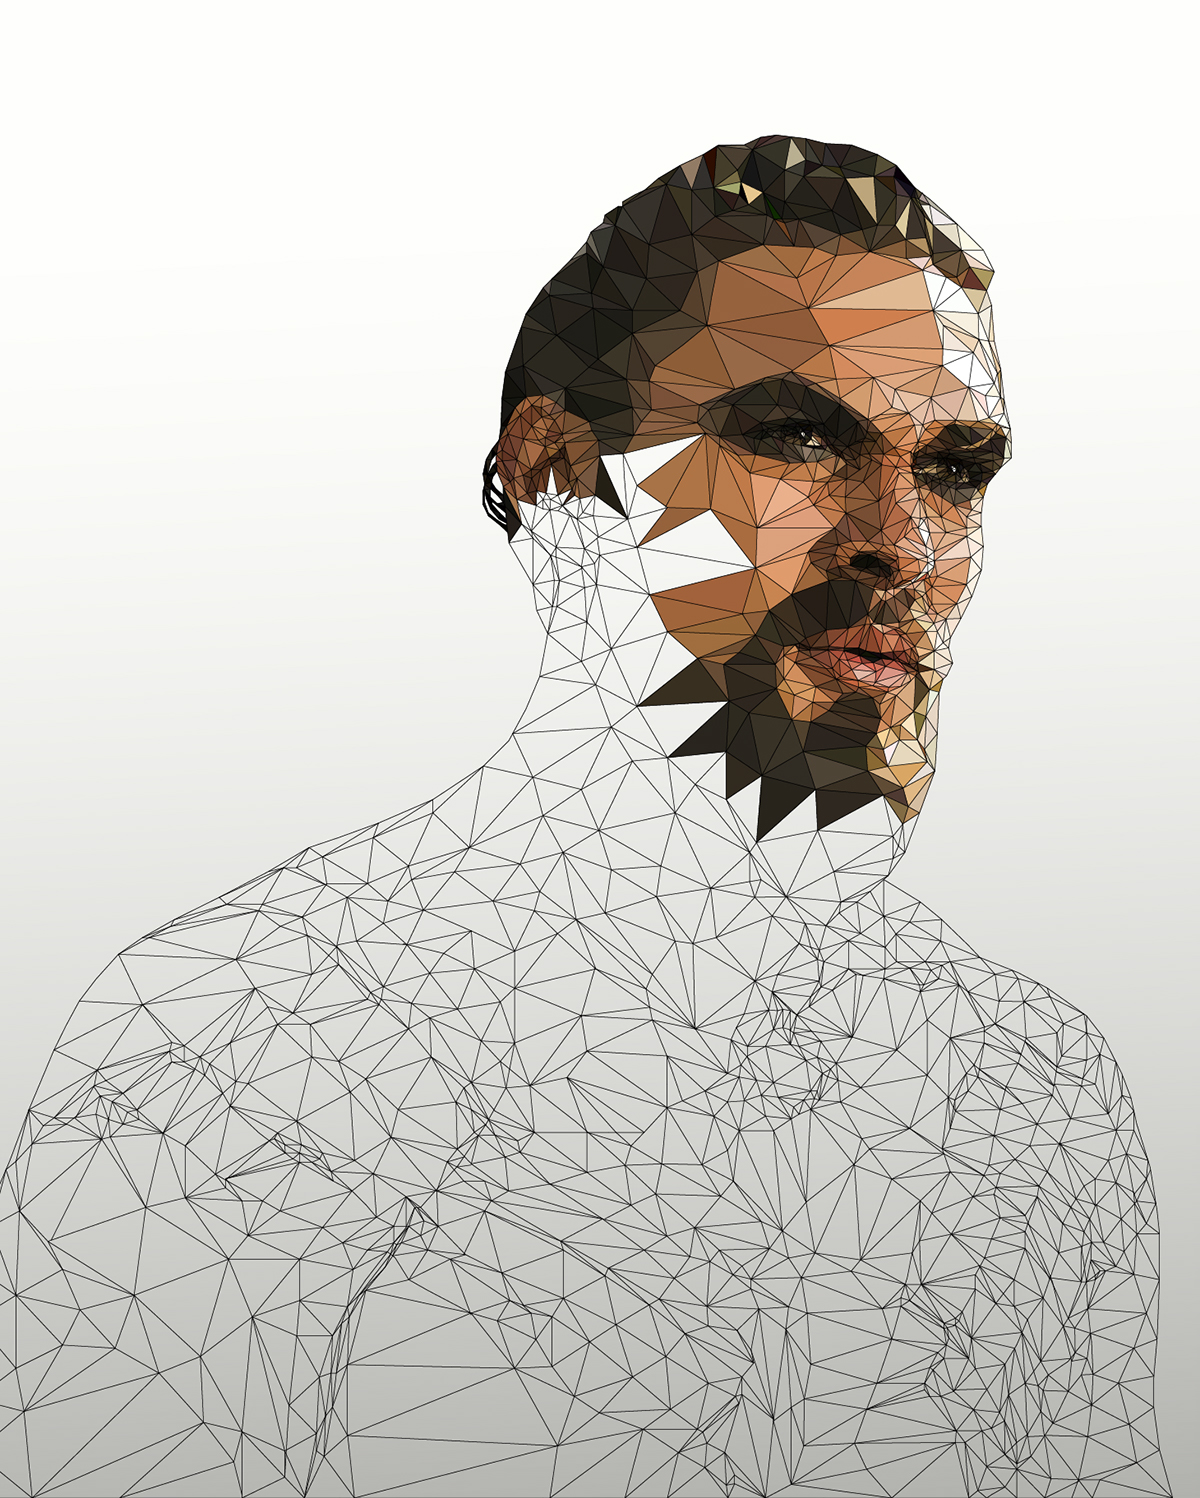 low-poly Polygons Game of Thrones the big bang theory sea low poly tutorial Low Poly portraits